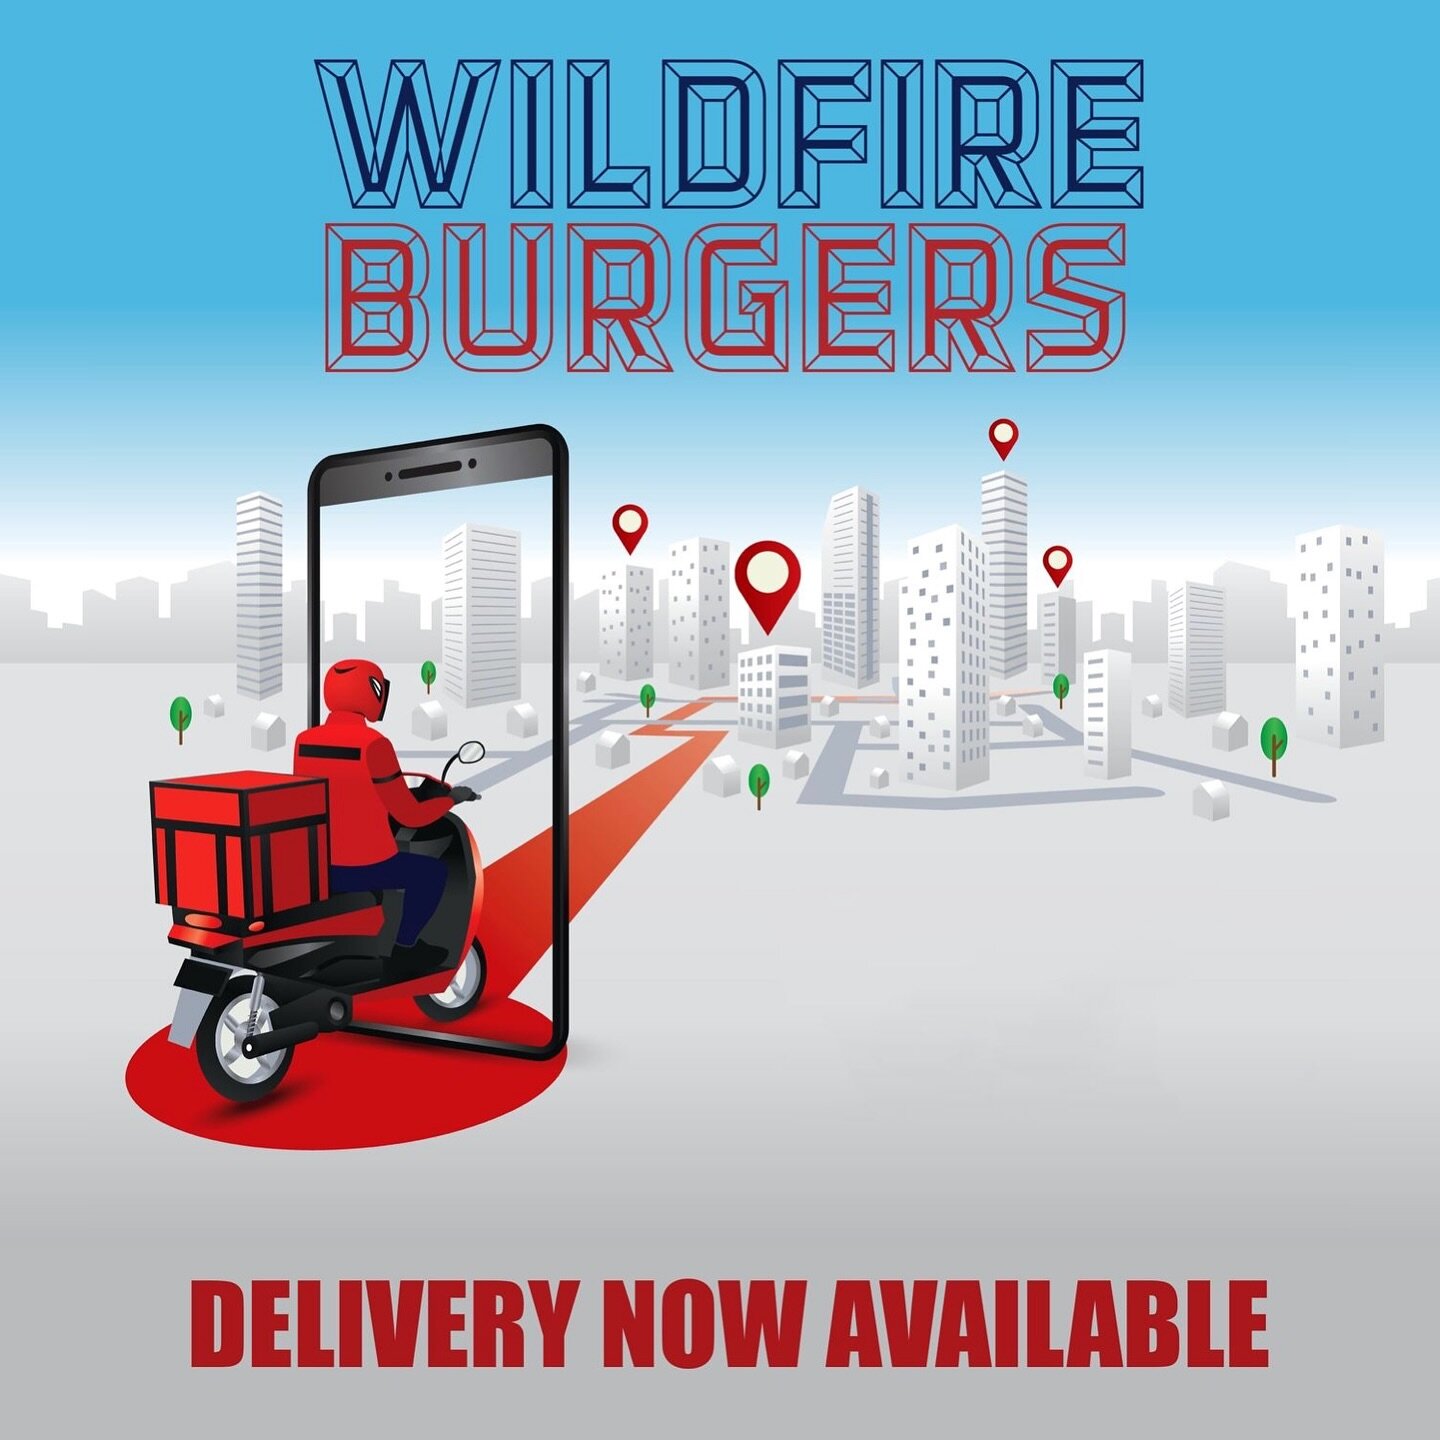 DELIVERY NOW AVAILABLE from Wildfire Burgers! Check our website at https://www.wildfireburgers.com/ for the links.

#burger #burgertime #fooddelivery